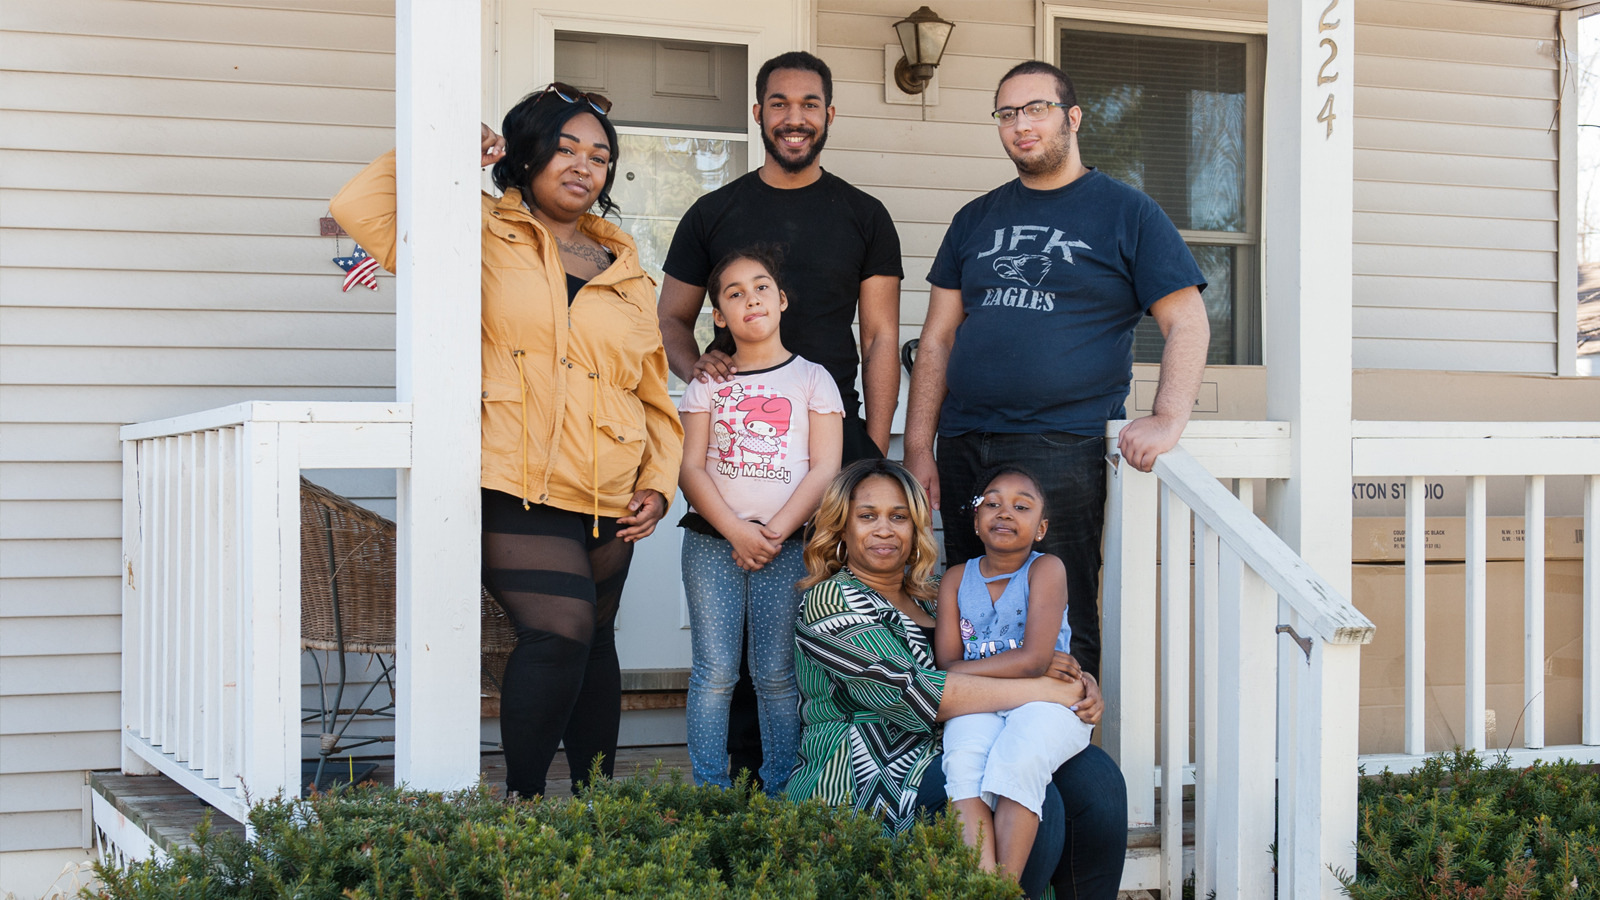 A homeowner and her family on their front porch.